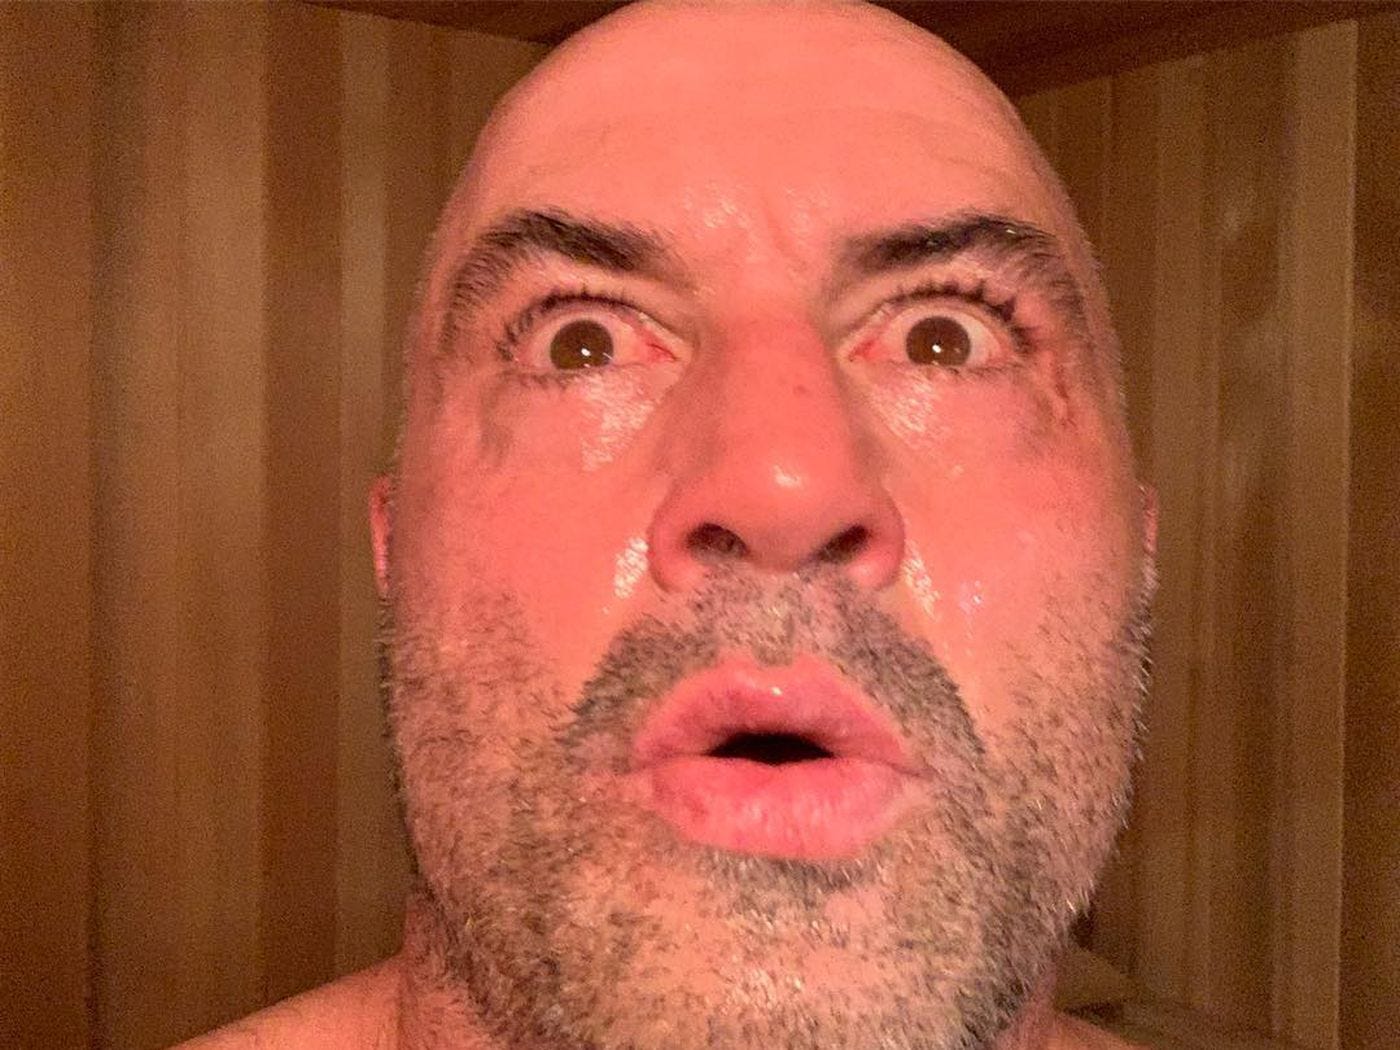 Joe Rogan made the weirdest face on Instagram and MMA fans are responding  with Photoshop - MMAmania.com